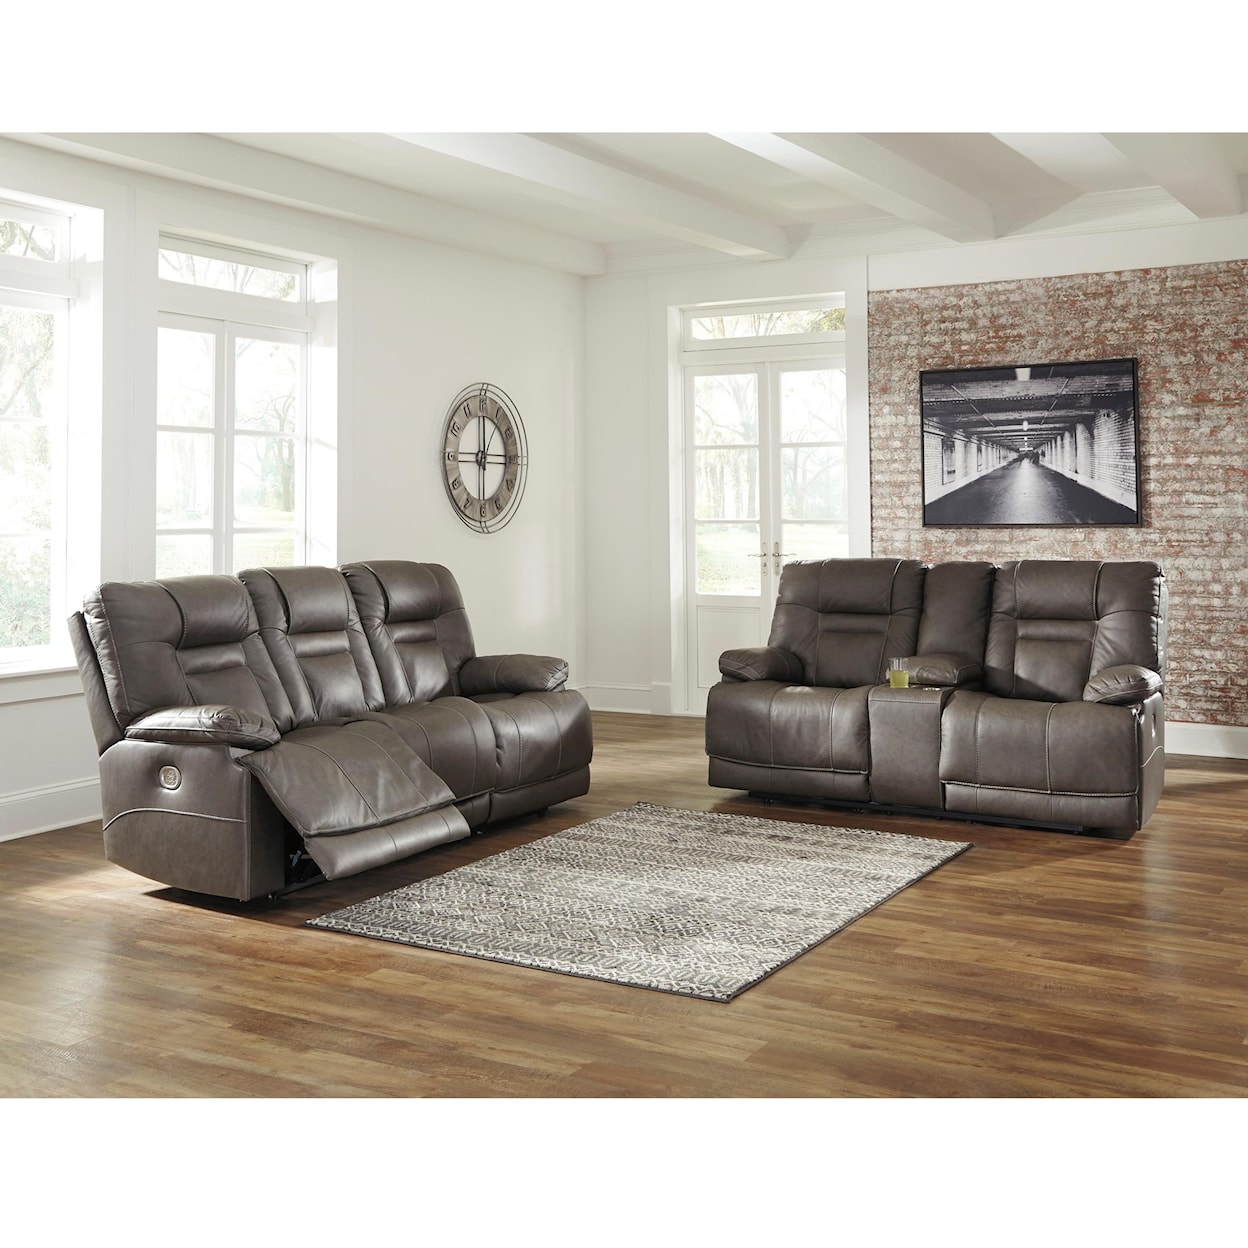 Ashley Furniture Signature Design Wurstrow Reclining Living Room Group